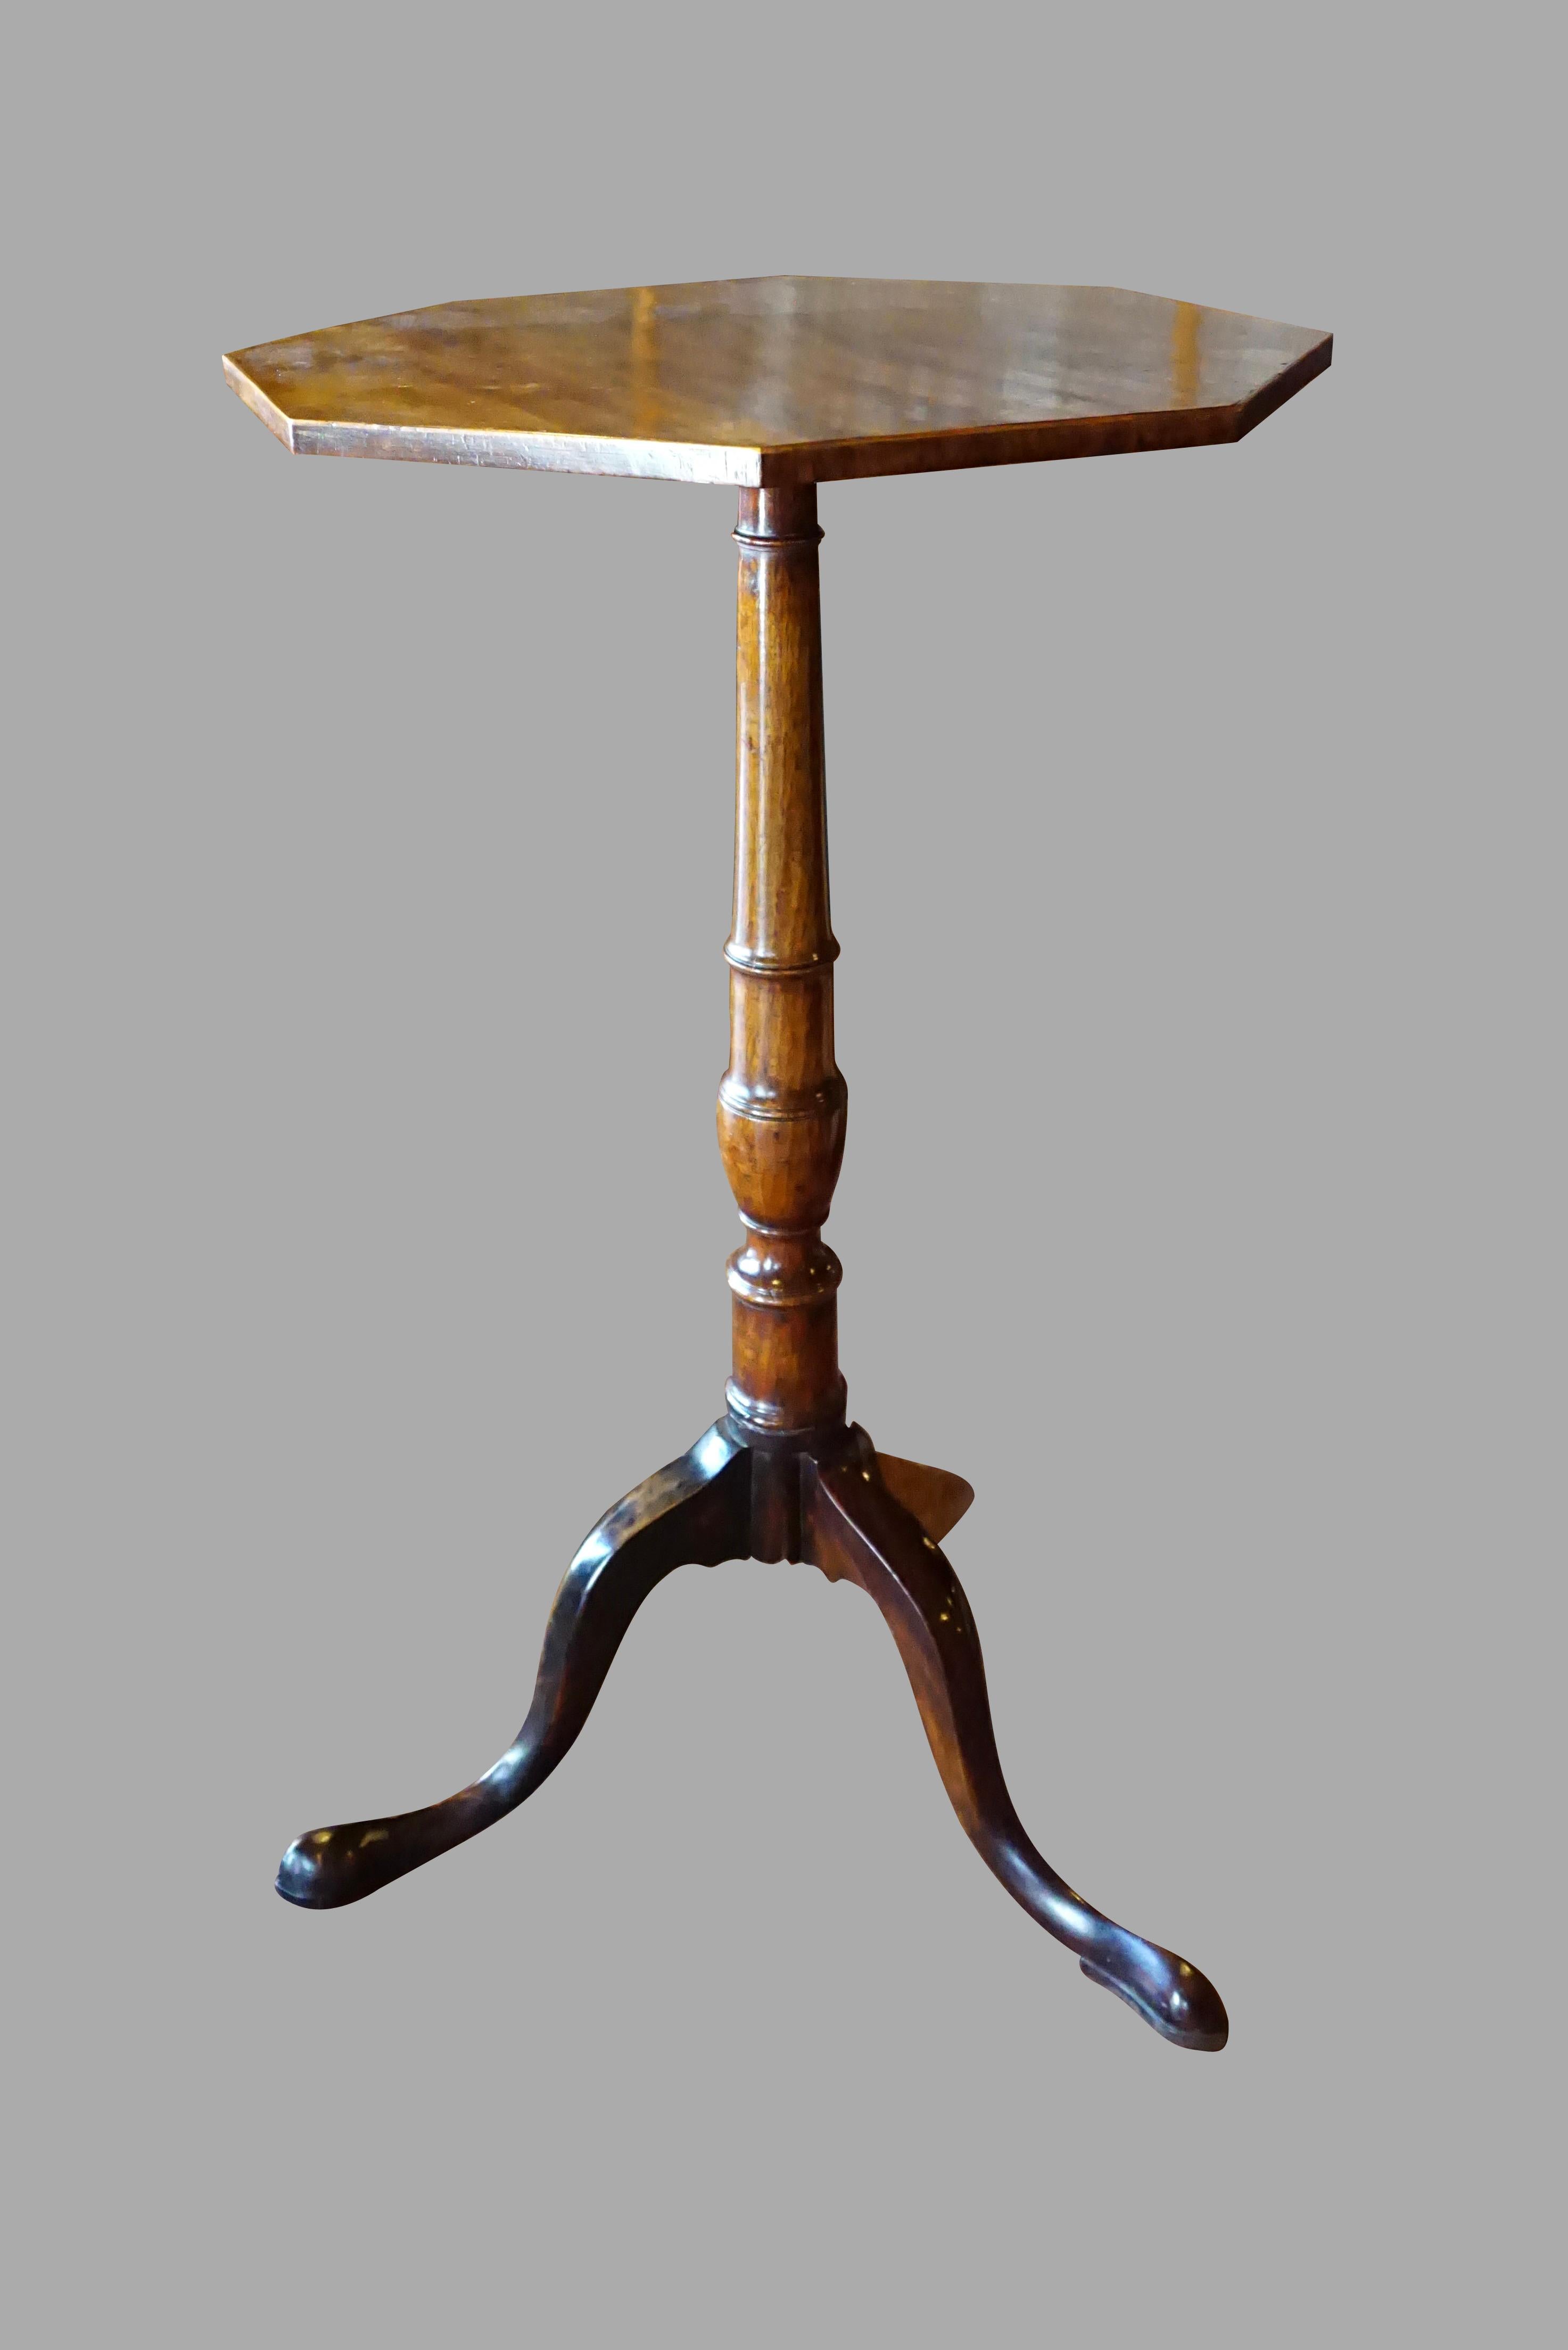 19th Century Georgian Inlaid Mahogany Hexagonal Top Candle Stand with Tripod Base For Sale